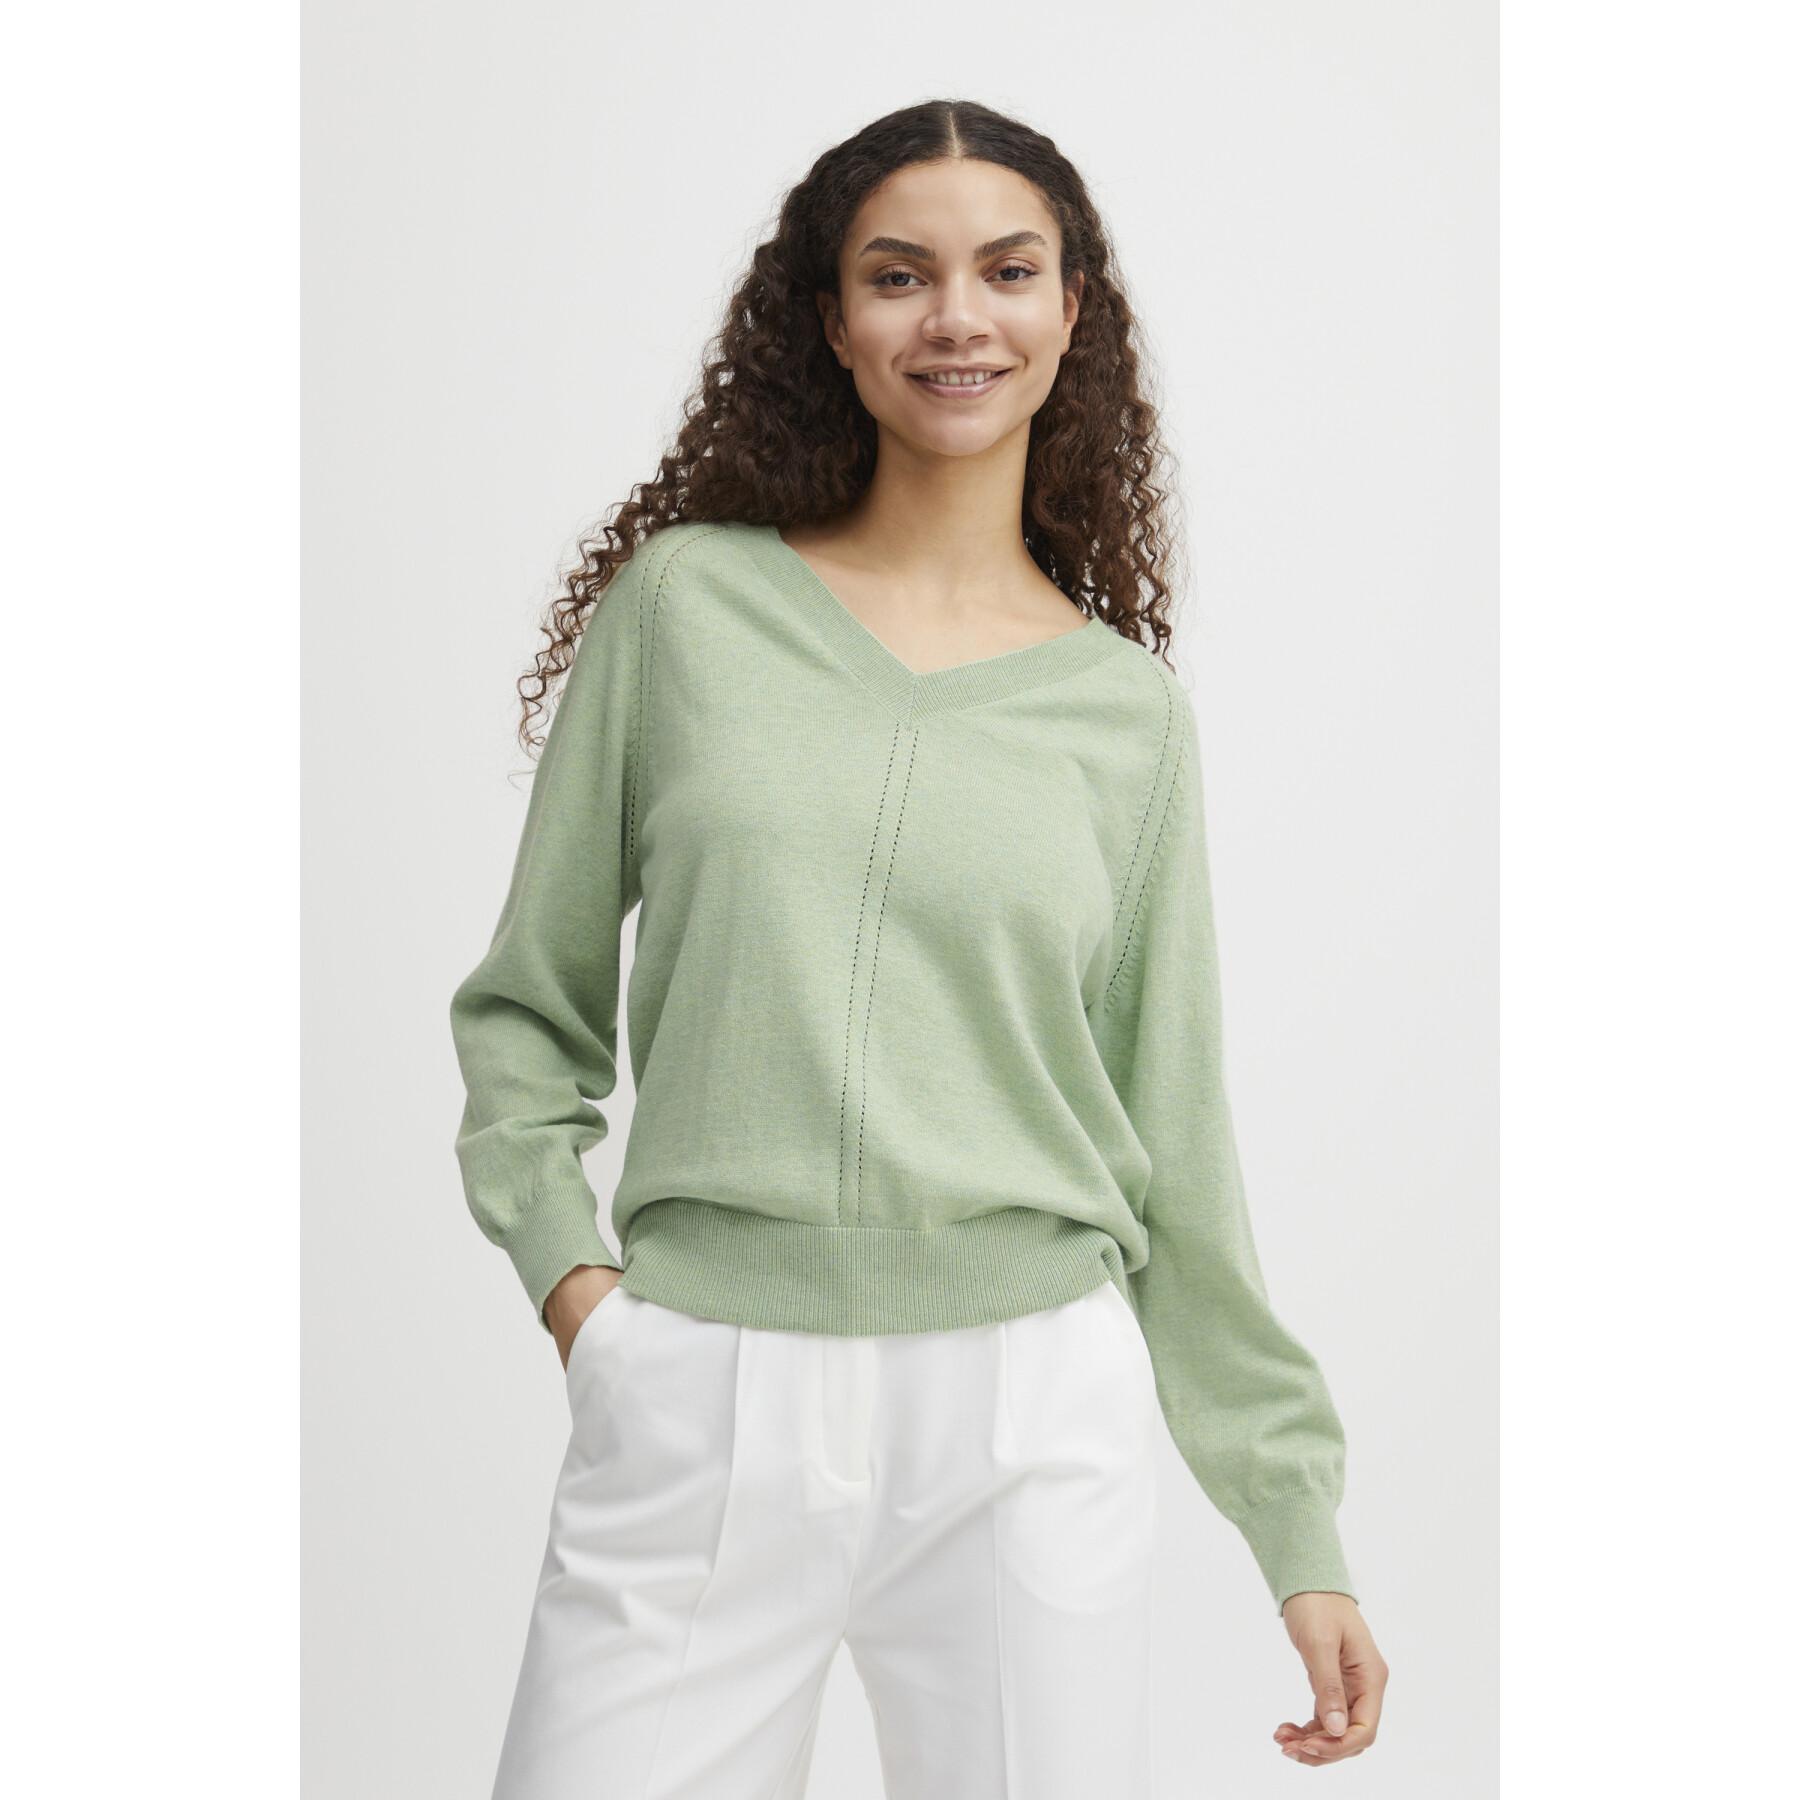 Women's v-neck sweater b.young Olinea